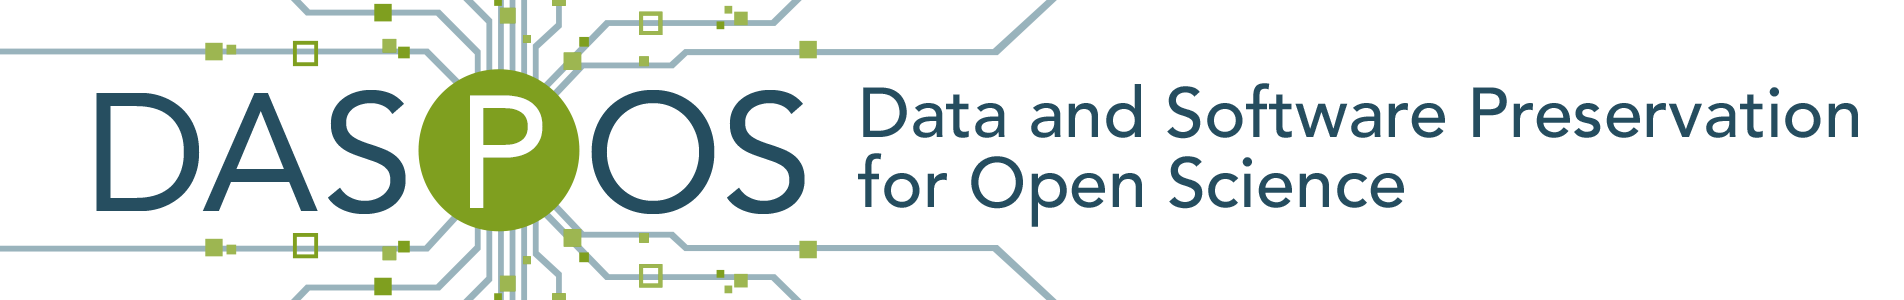 Data Preservation for Open Science (DASPOS) logo